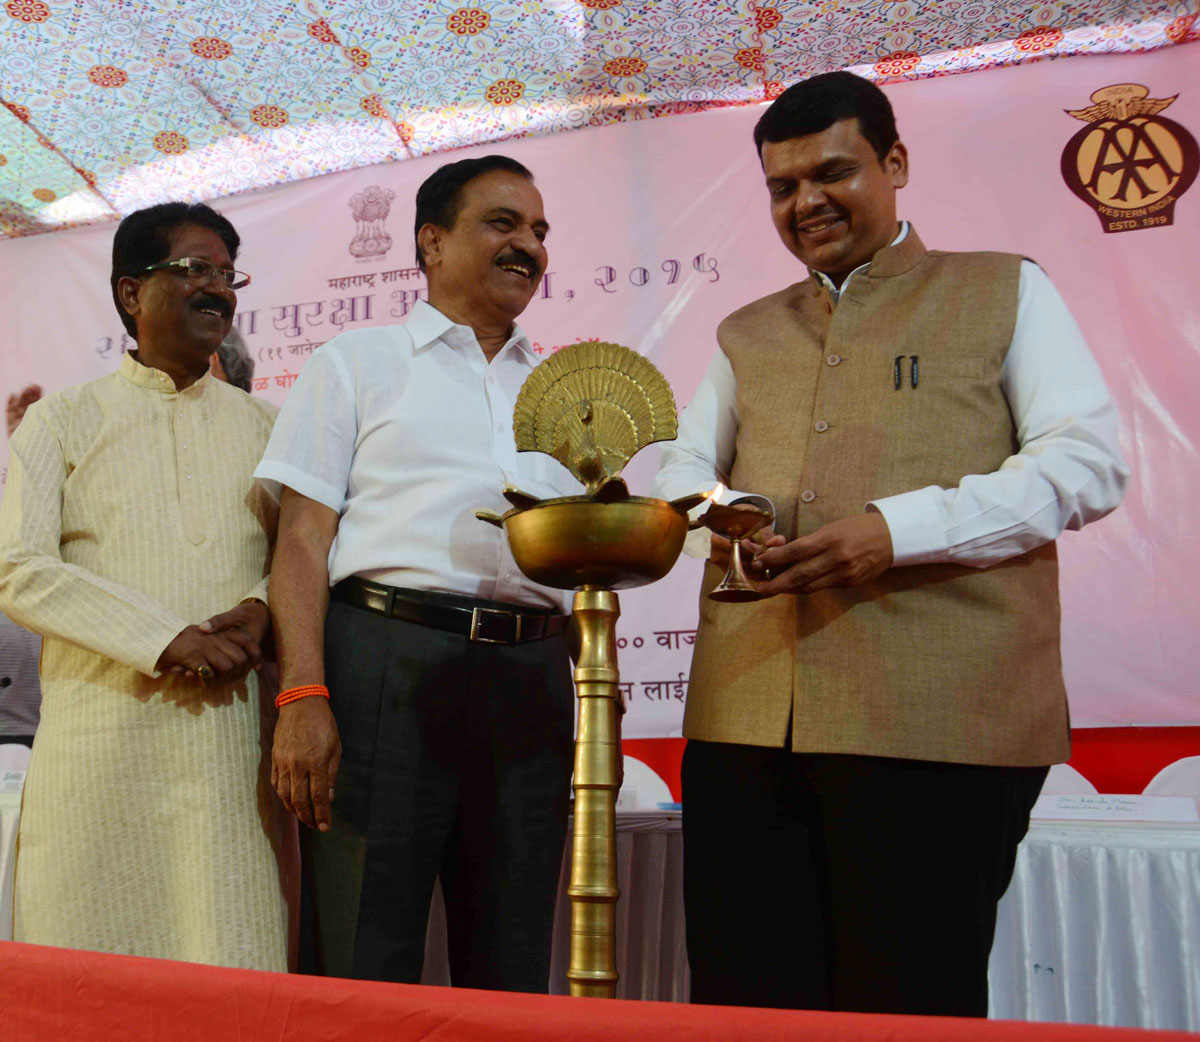 Chief Minister Devendra Fadnavis Inaugurated 26th Road Safety Mission 2015 at Marine Drive.